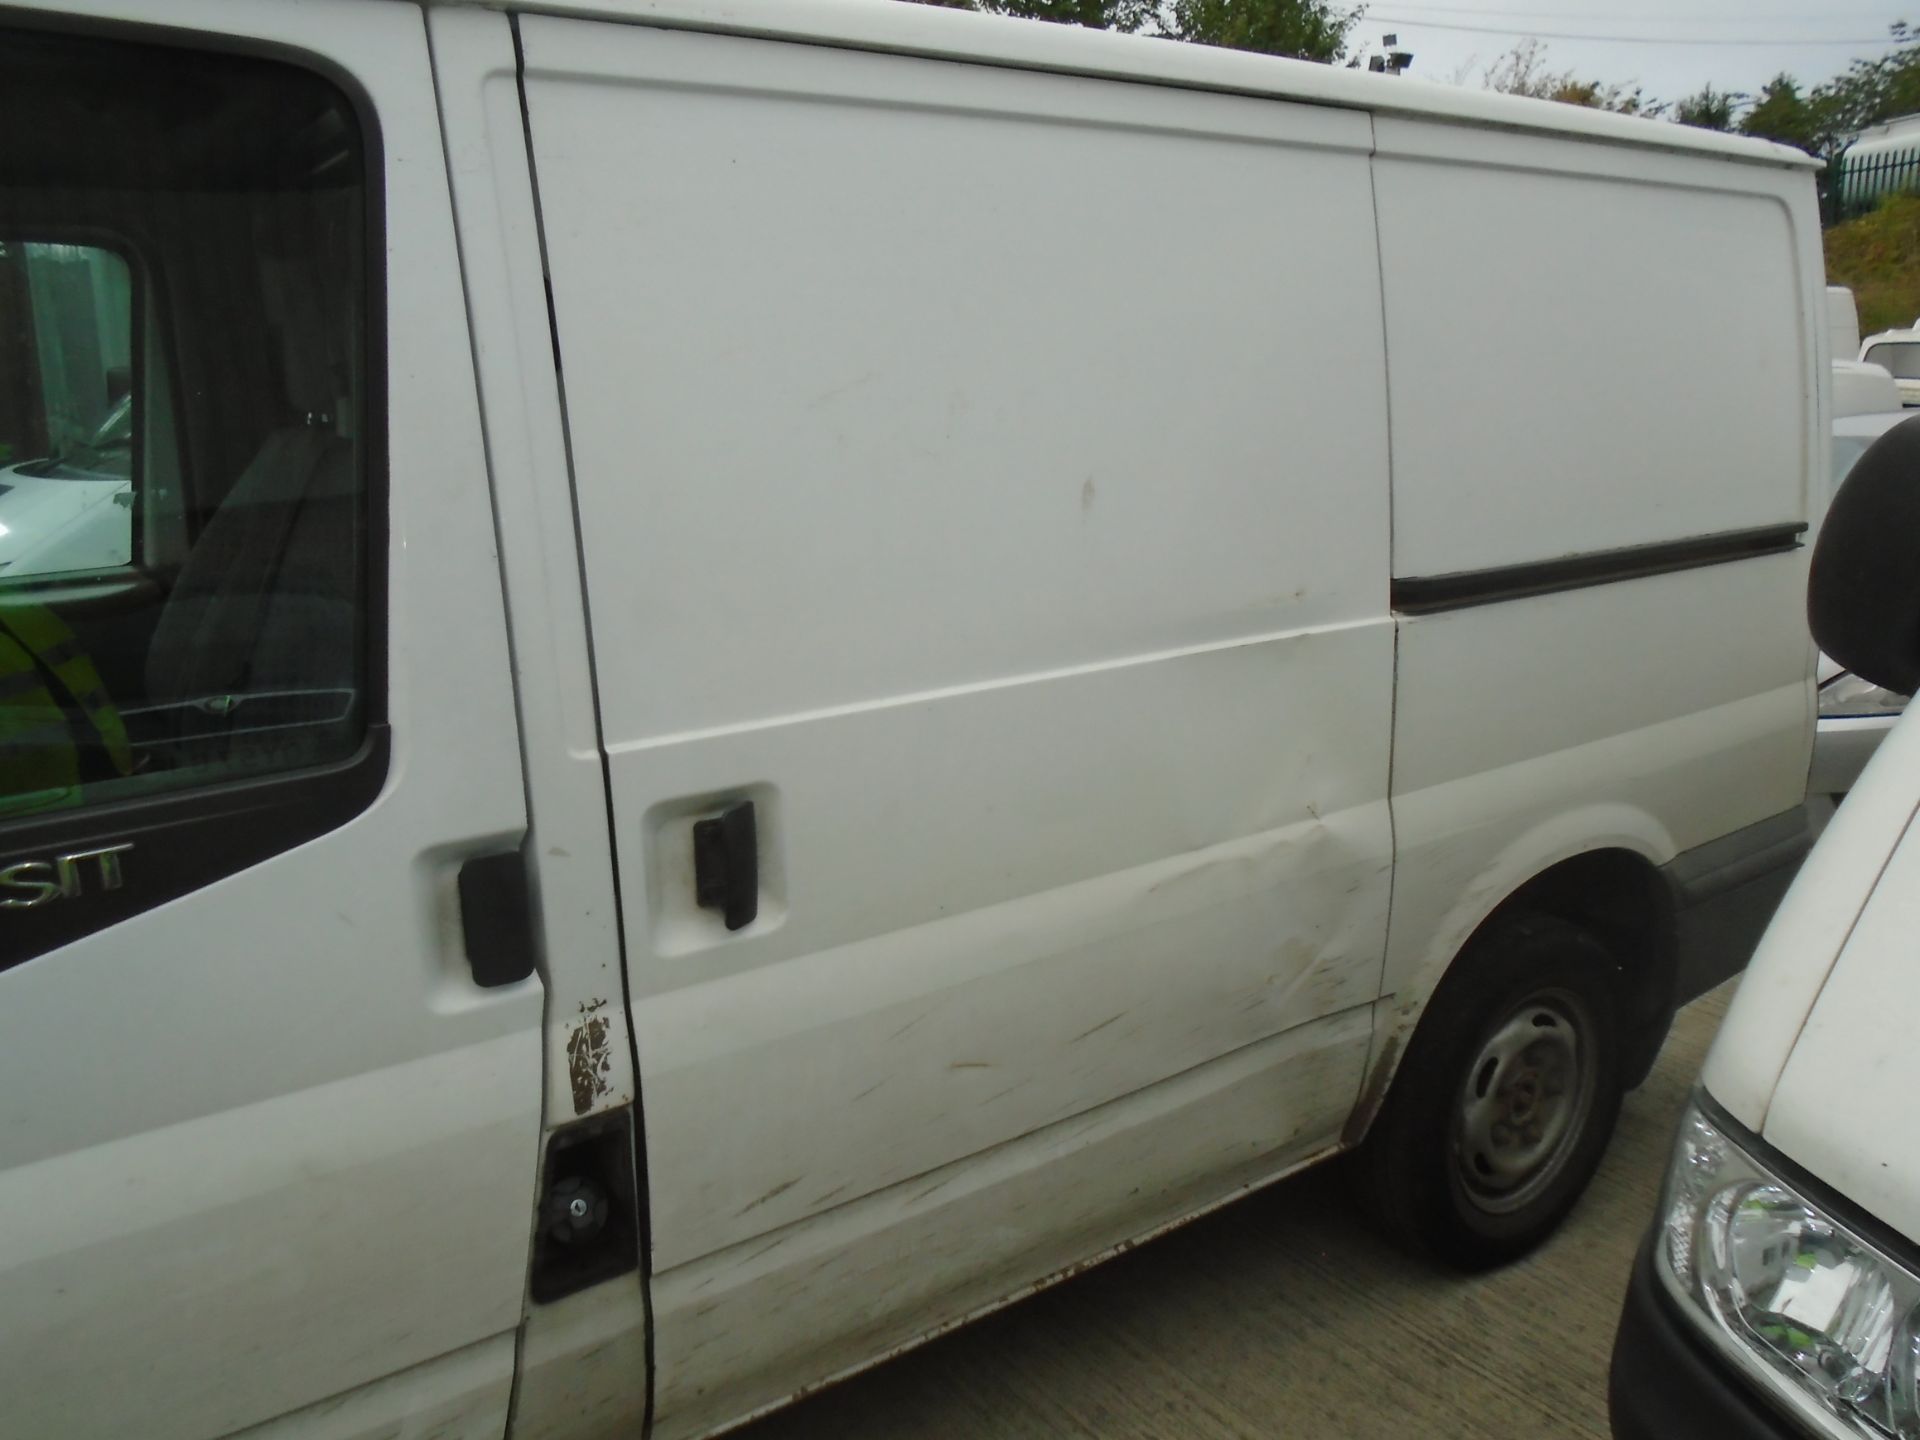 Ford Transit 85 T280M f.w.d. - Image 3 of 4